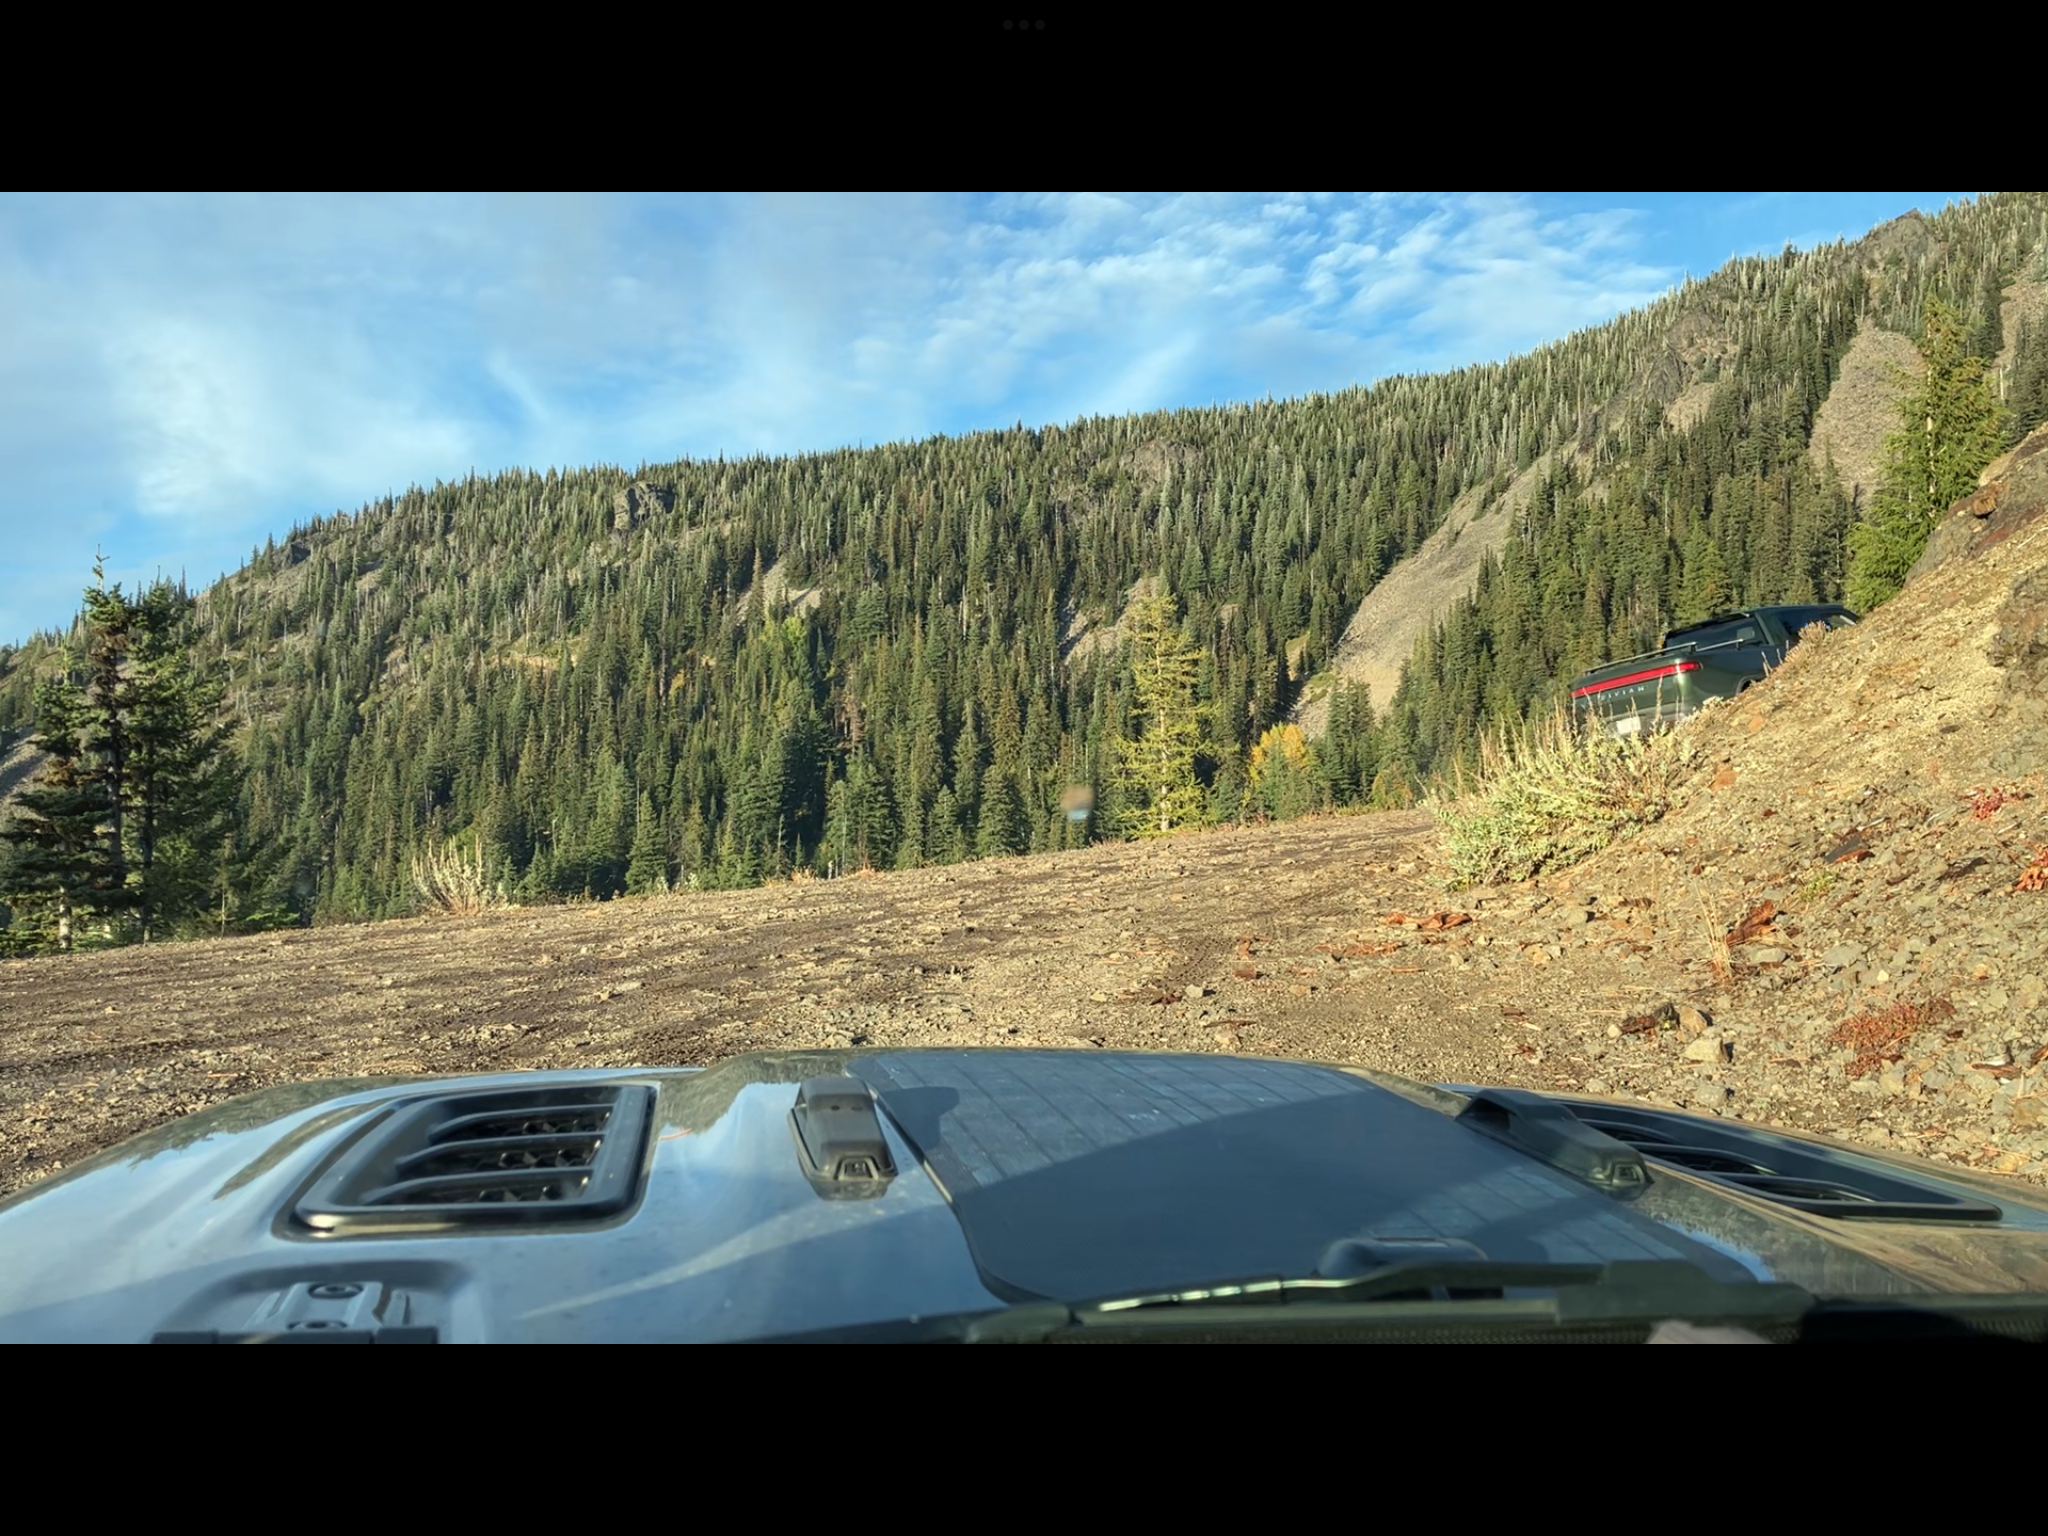 Rivian R1T R1S Proposed Group Trip: Mt. Hood - Hood River Loop on October 23rd. C4A14A51-CCD1-4743-9FE9-A37B2F40EC94